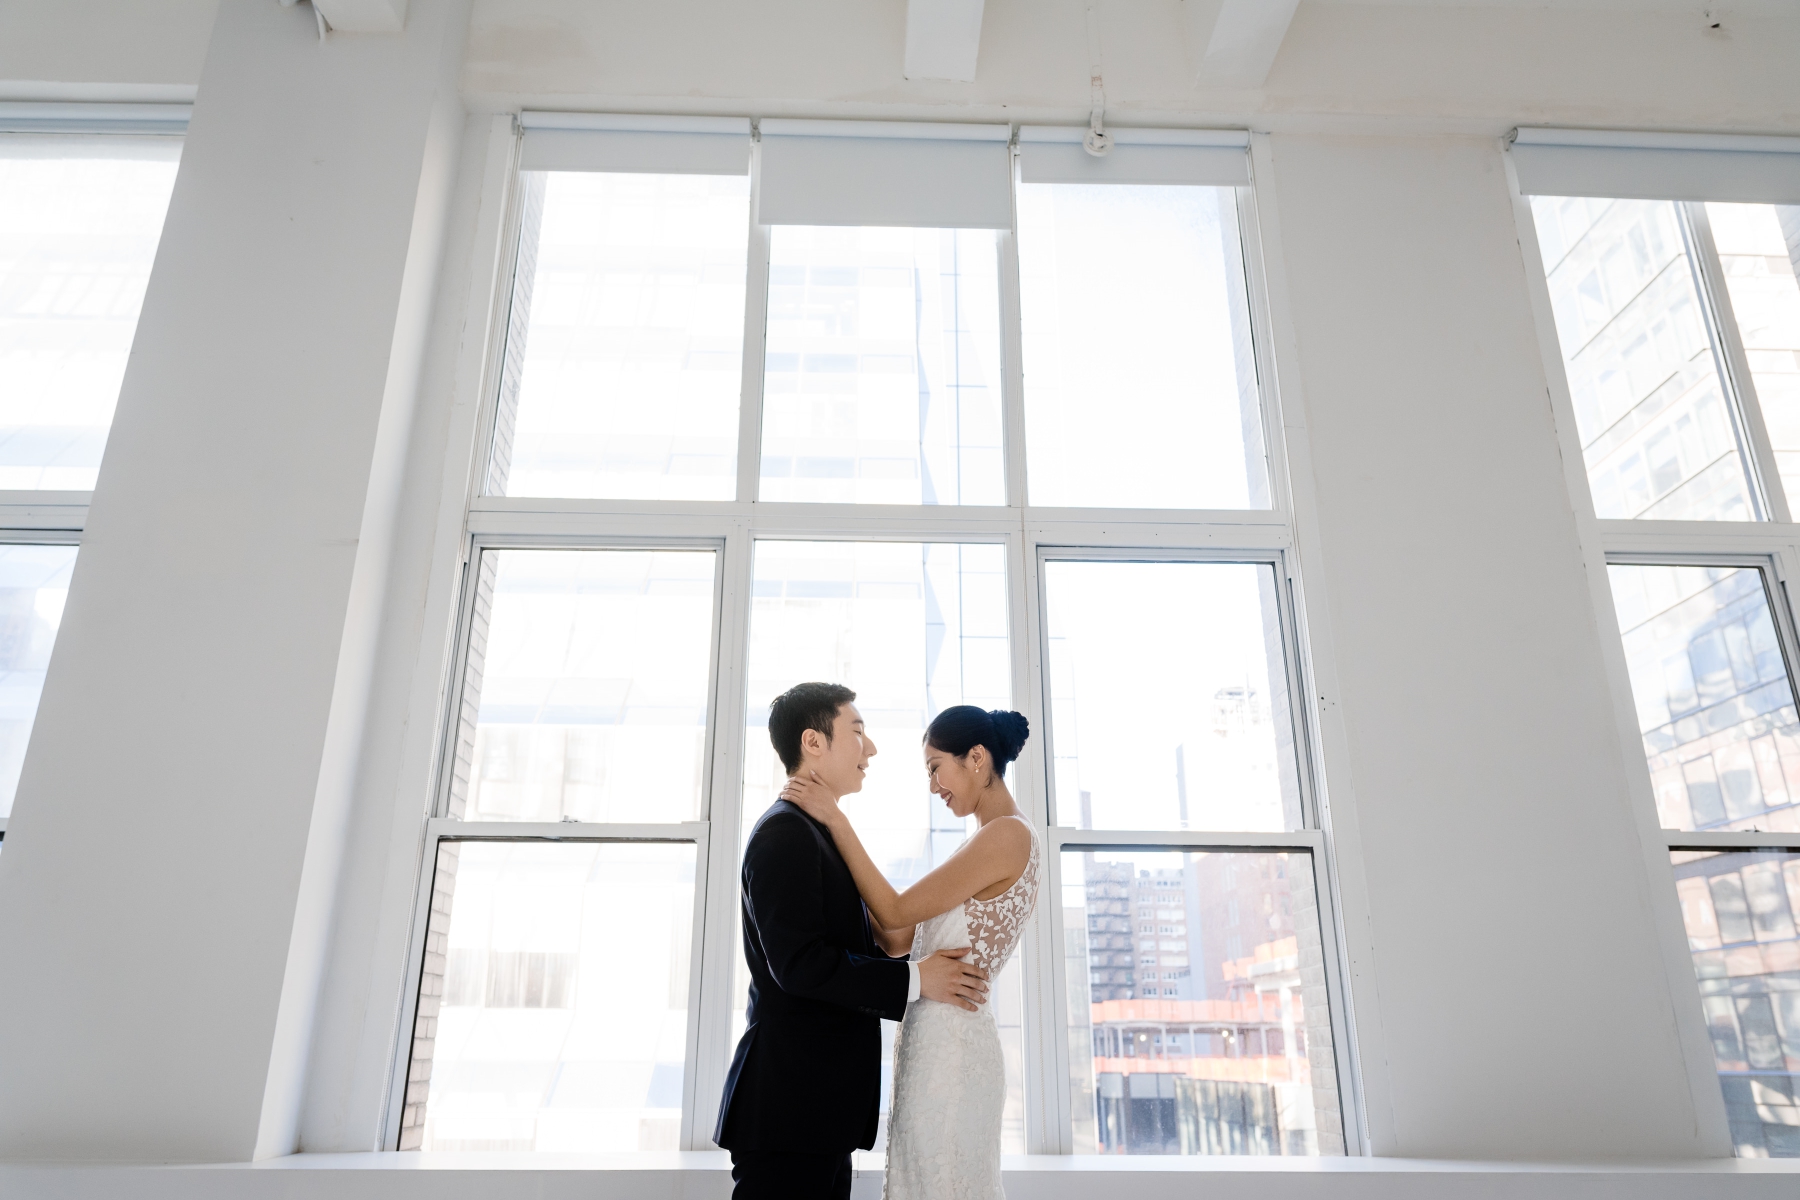  images from my styled shoot, partnering with the following vendors: Jenny Yoo NYC Bridal, AKA Cedric Salon, Mariana Collignon (Makeup), as well as Location05 for our venue, and Gary Feng Videography. Photos were taken first at Cedric's salon, then a